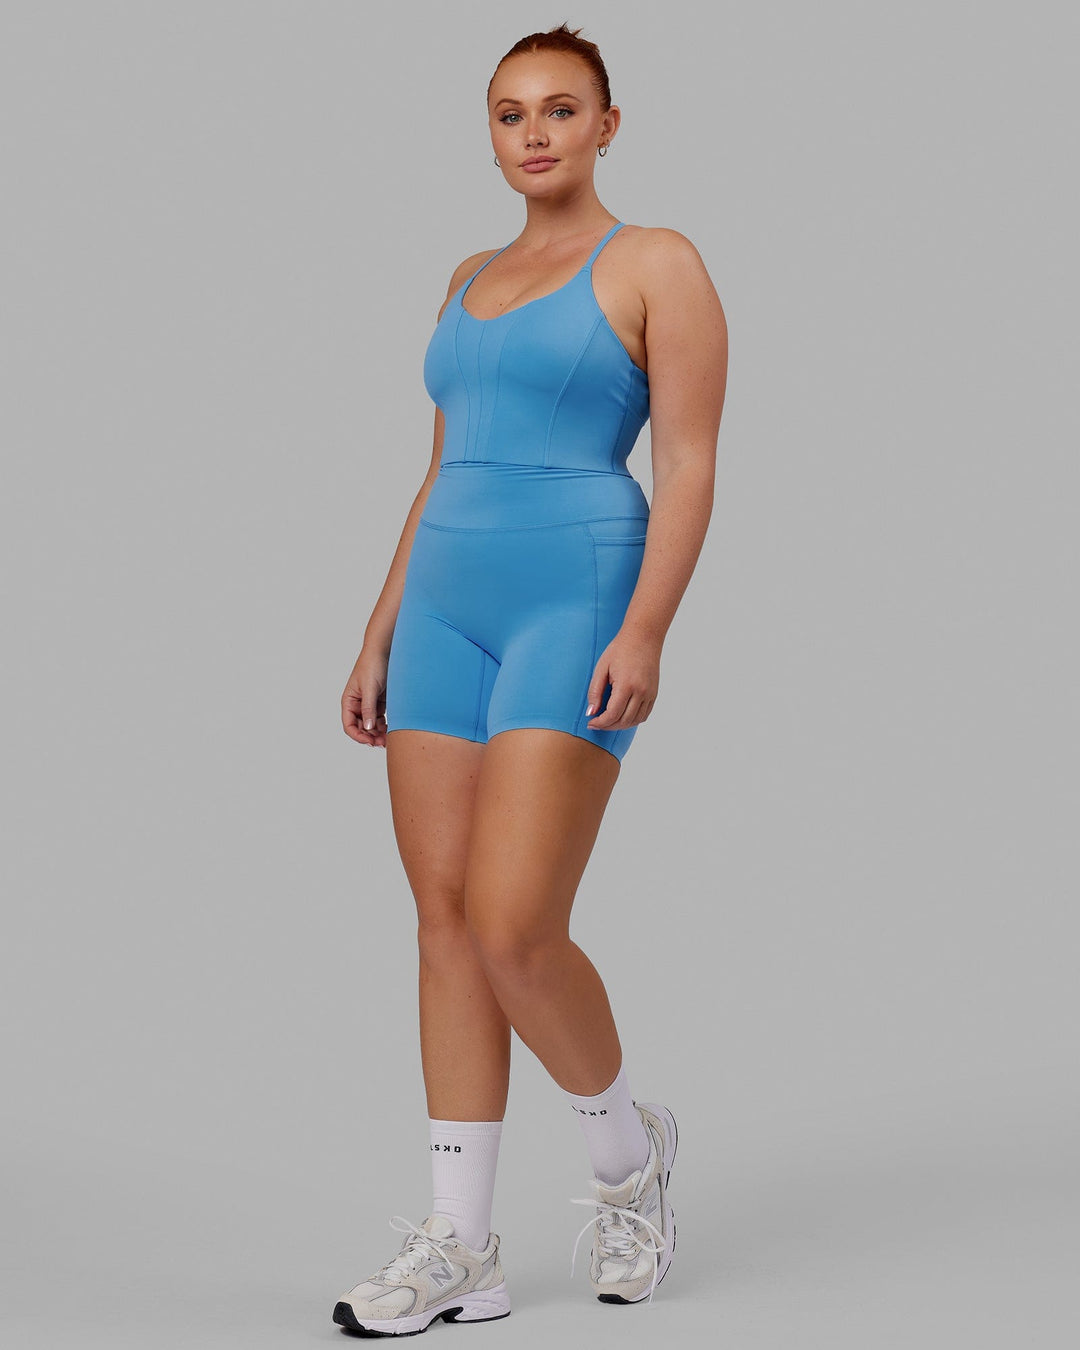 Woman wearing Elixir Mid Short Tight with Pockets - Azure Blue